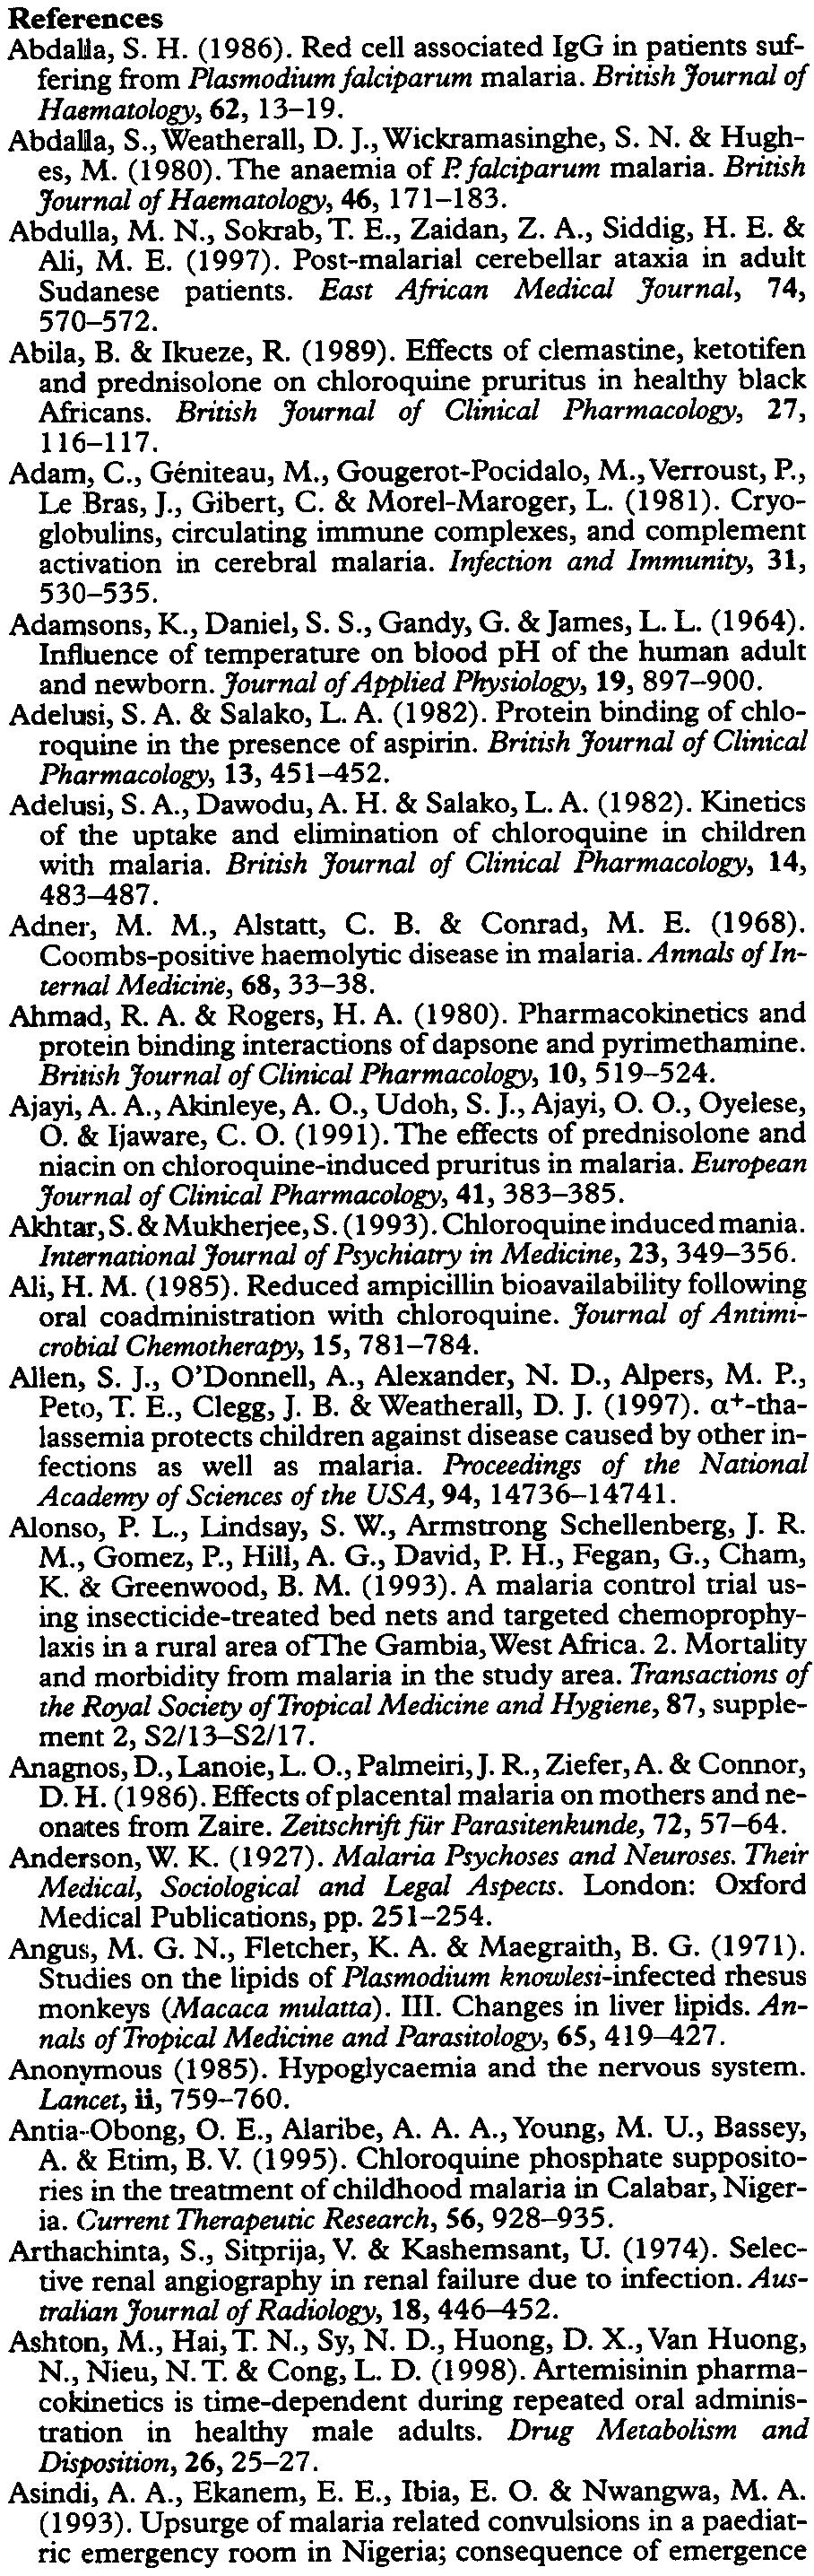 Sm4 SEVERE FALCIPARUM MALARIA References Abda14a, S. H. (1986). Red cell associated IgG in patients suffering from Plasmodiumfalciparum malaria. British Journal of Haematology,62,13-19. Abdama, S.